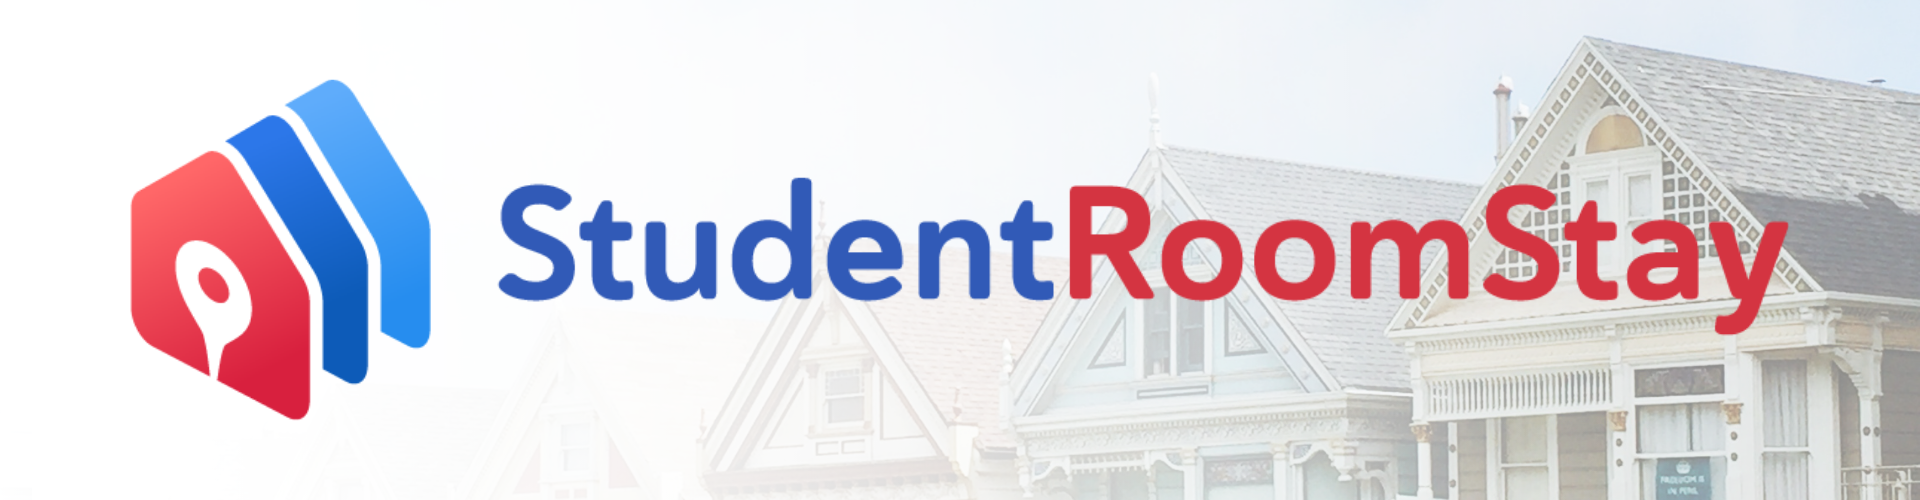 StudentRoomStay - Student Housing